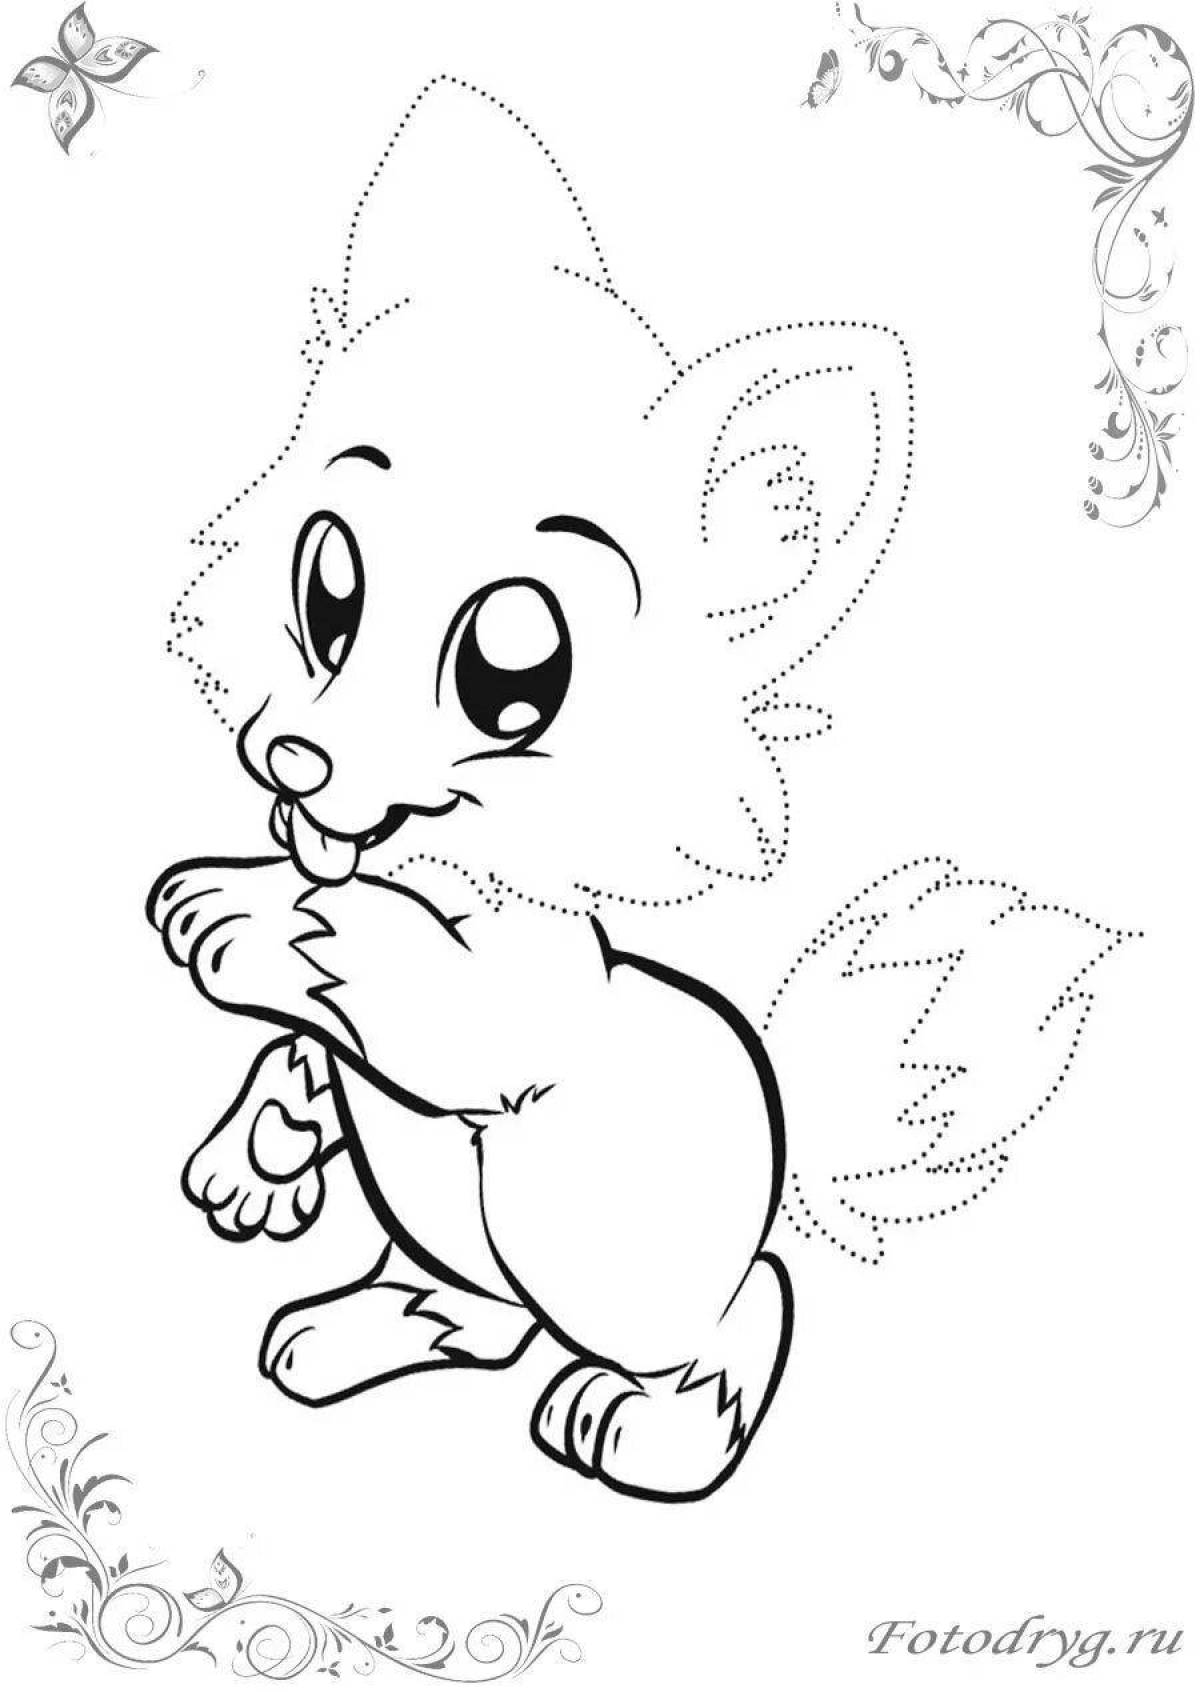 Coloring page dazzling wolf cub